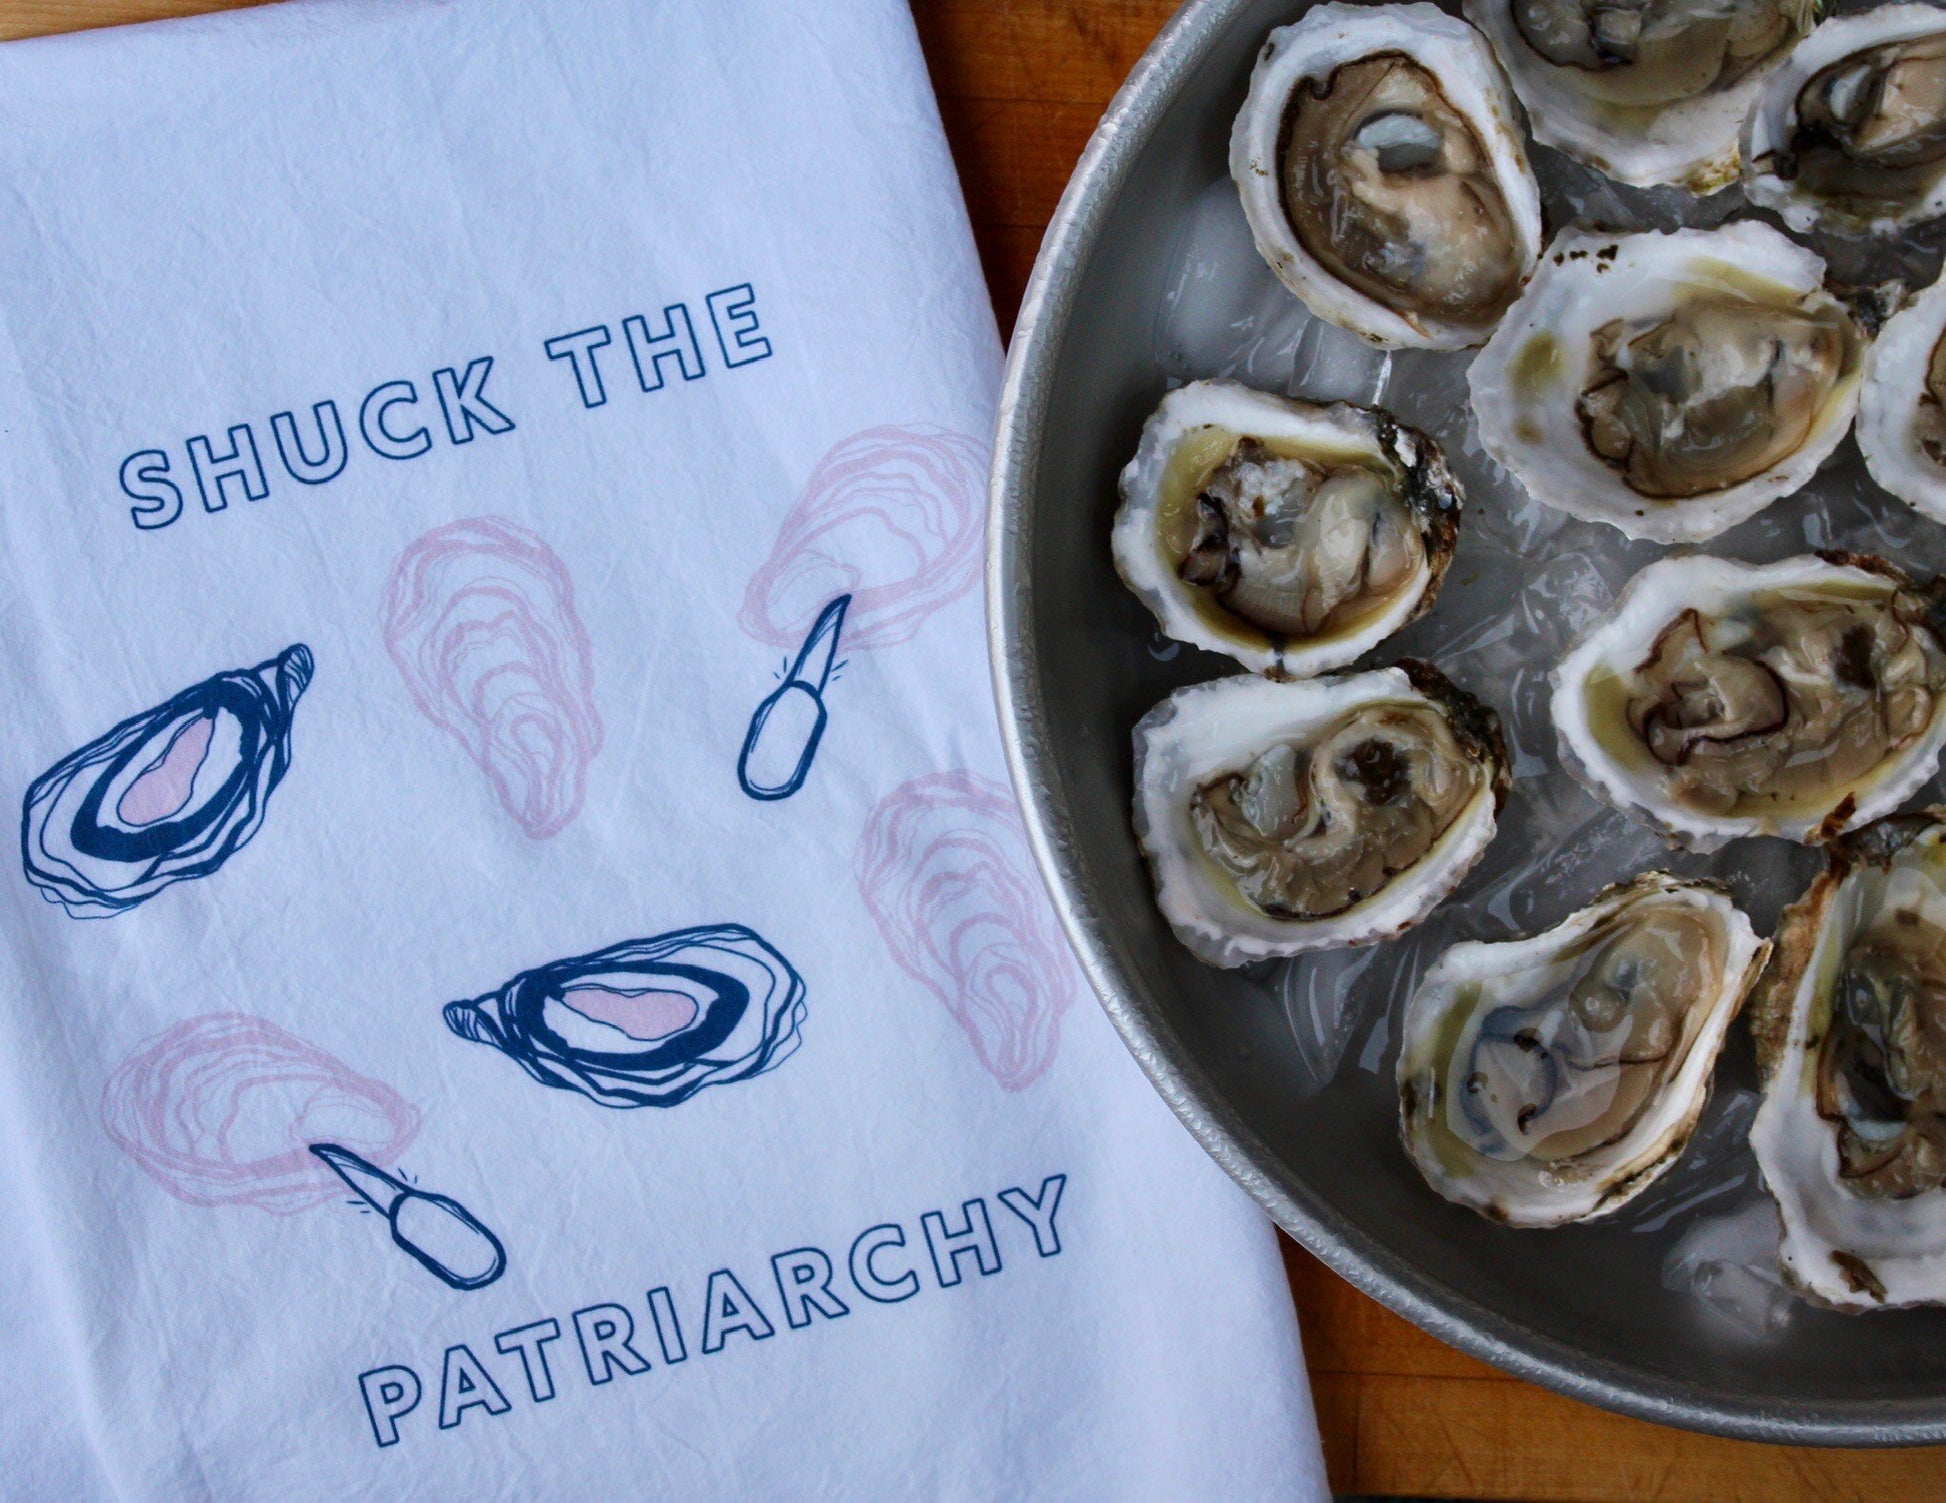 A white tea towel that reads "Shuck the Patriarchy" sits next to a platter of oysters on ice